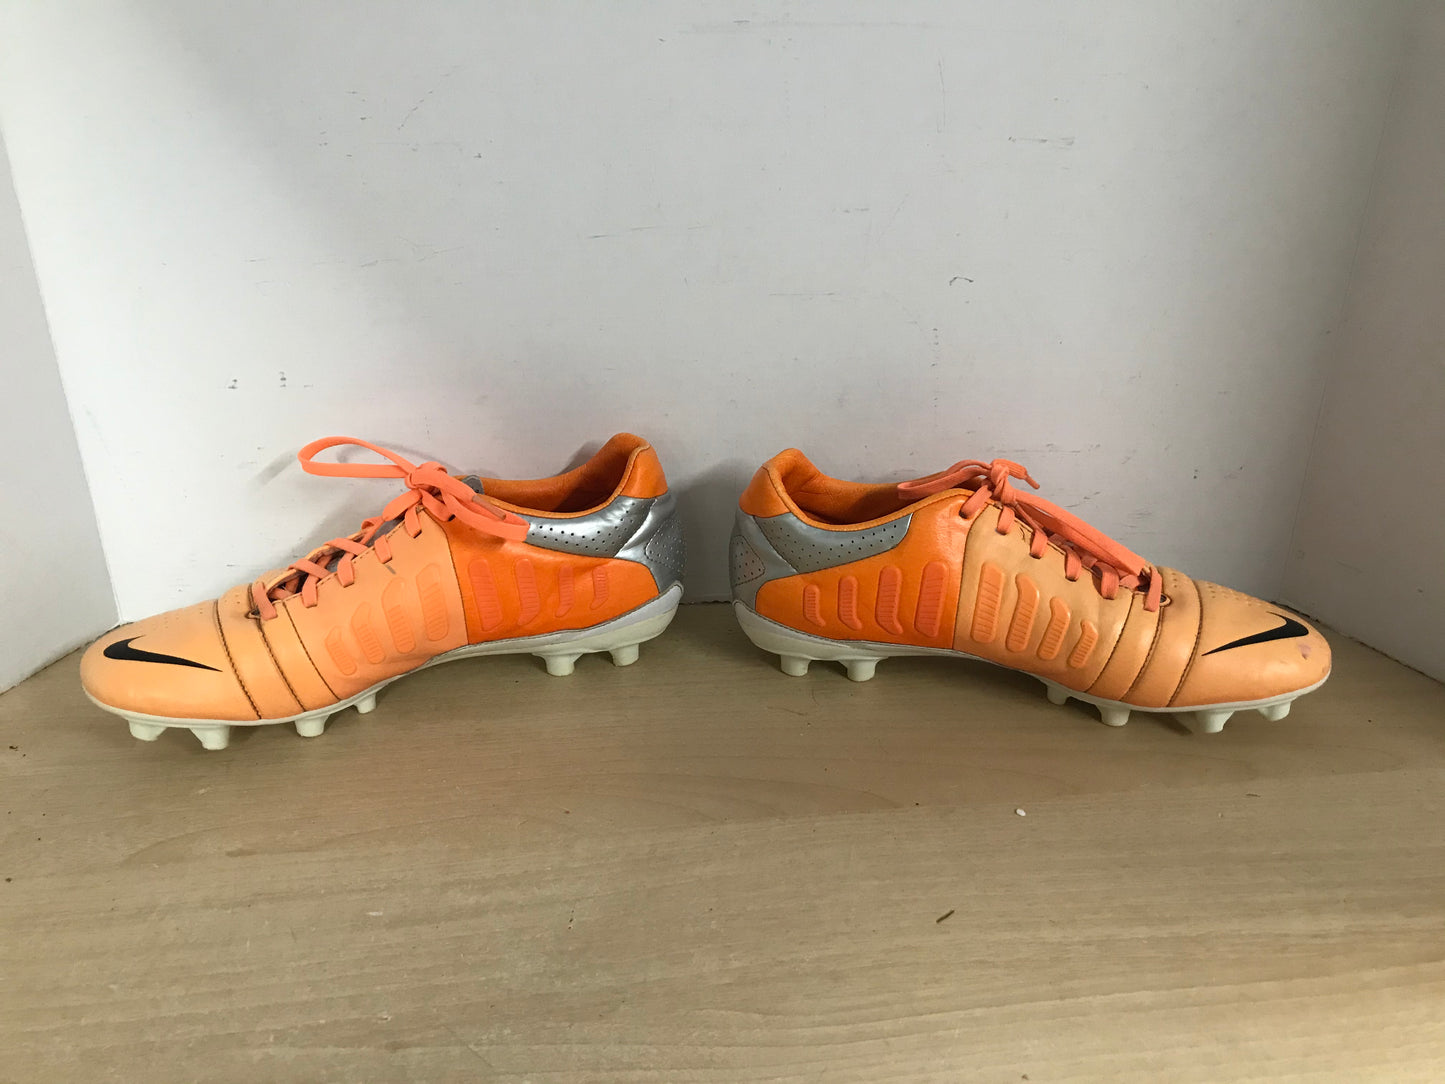 Soccer Shoes Cleats Men's Size 8.5 NIke CTR360 Leather Peach Silver Excellent Quality